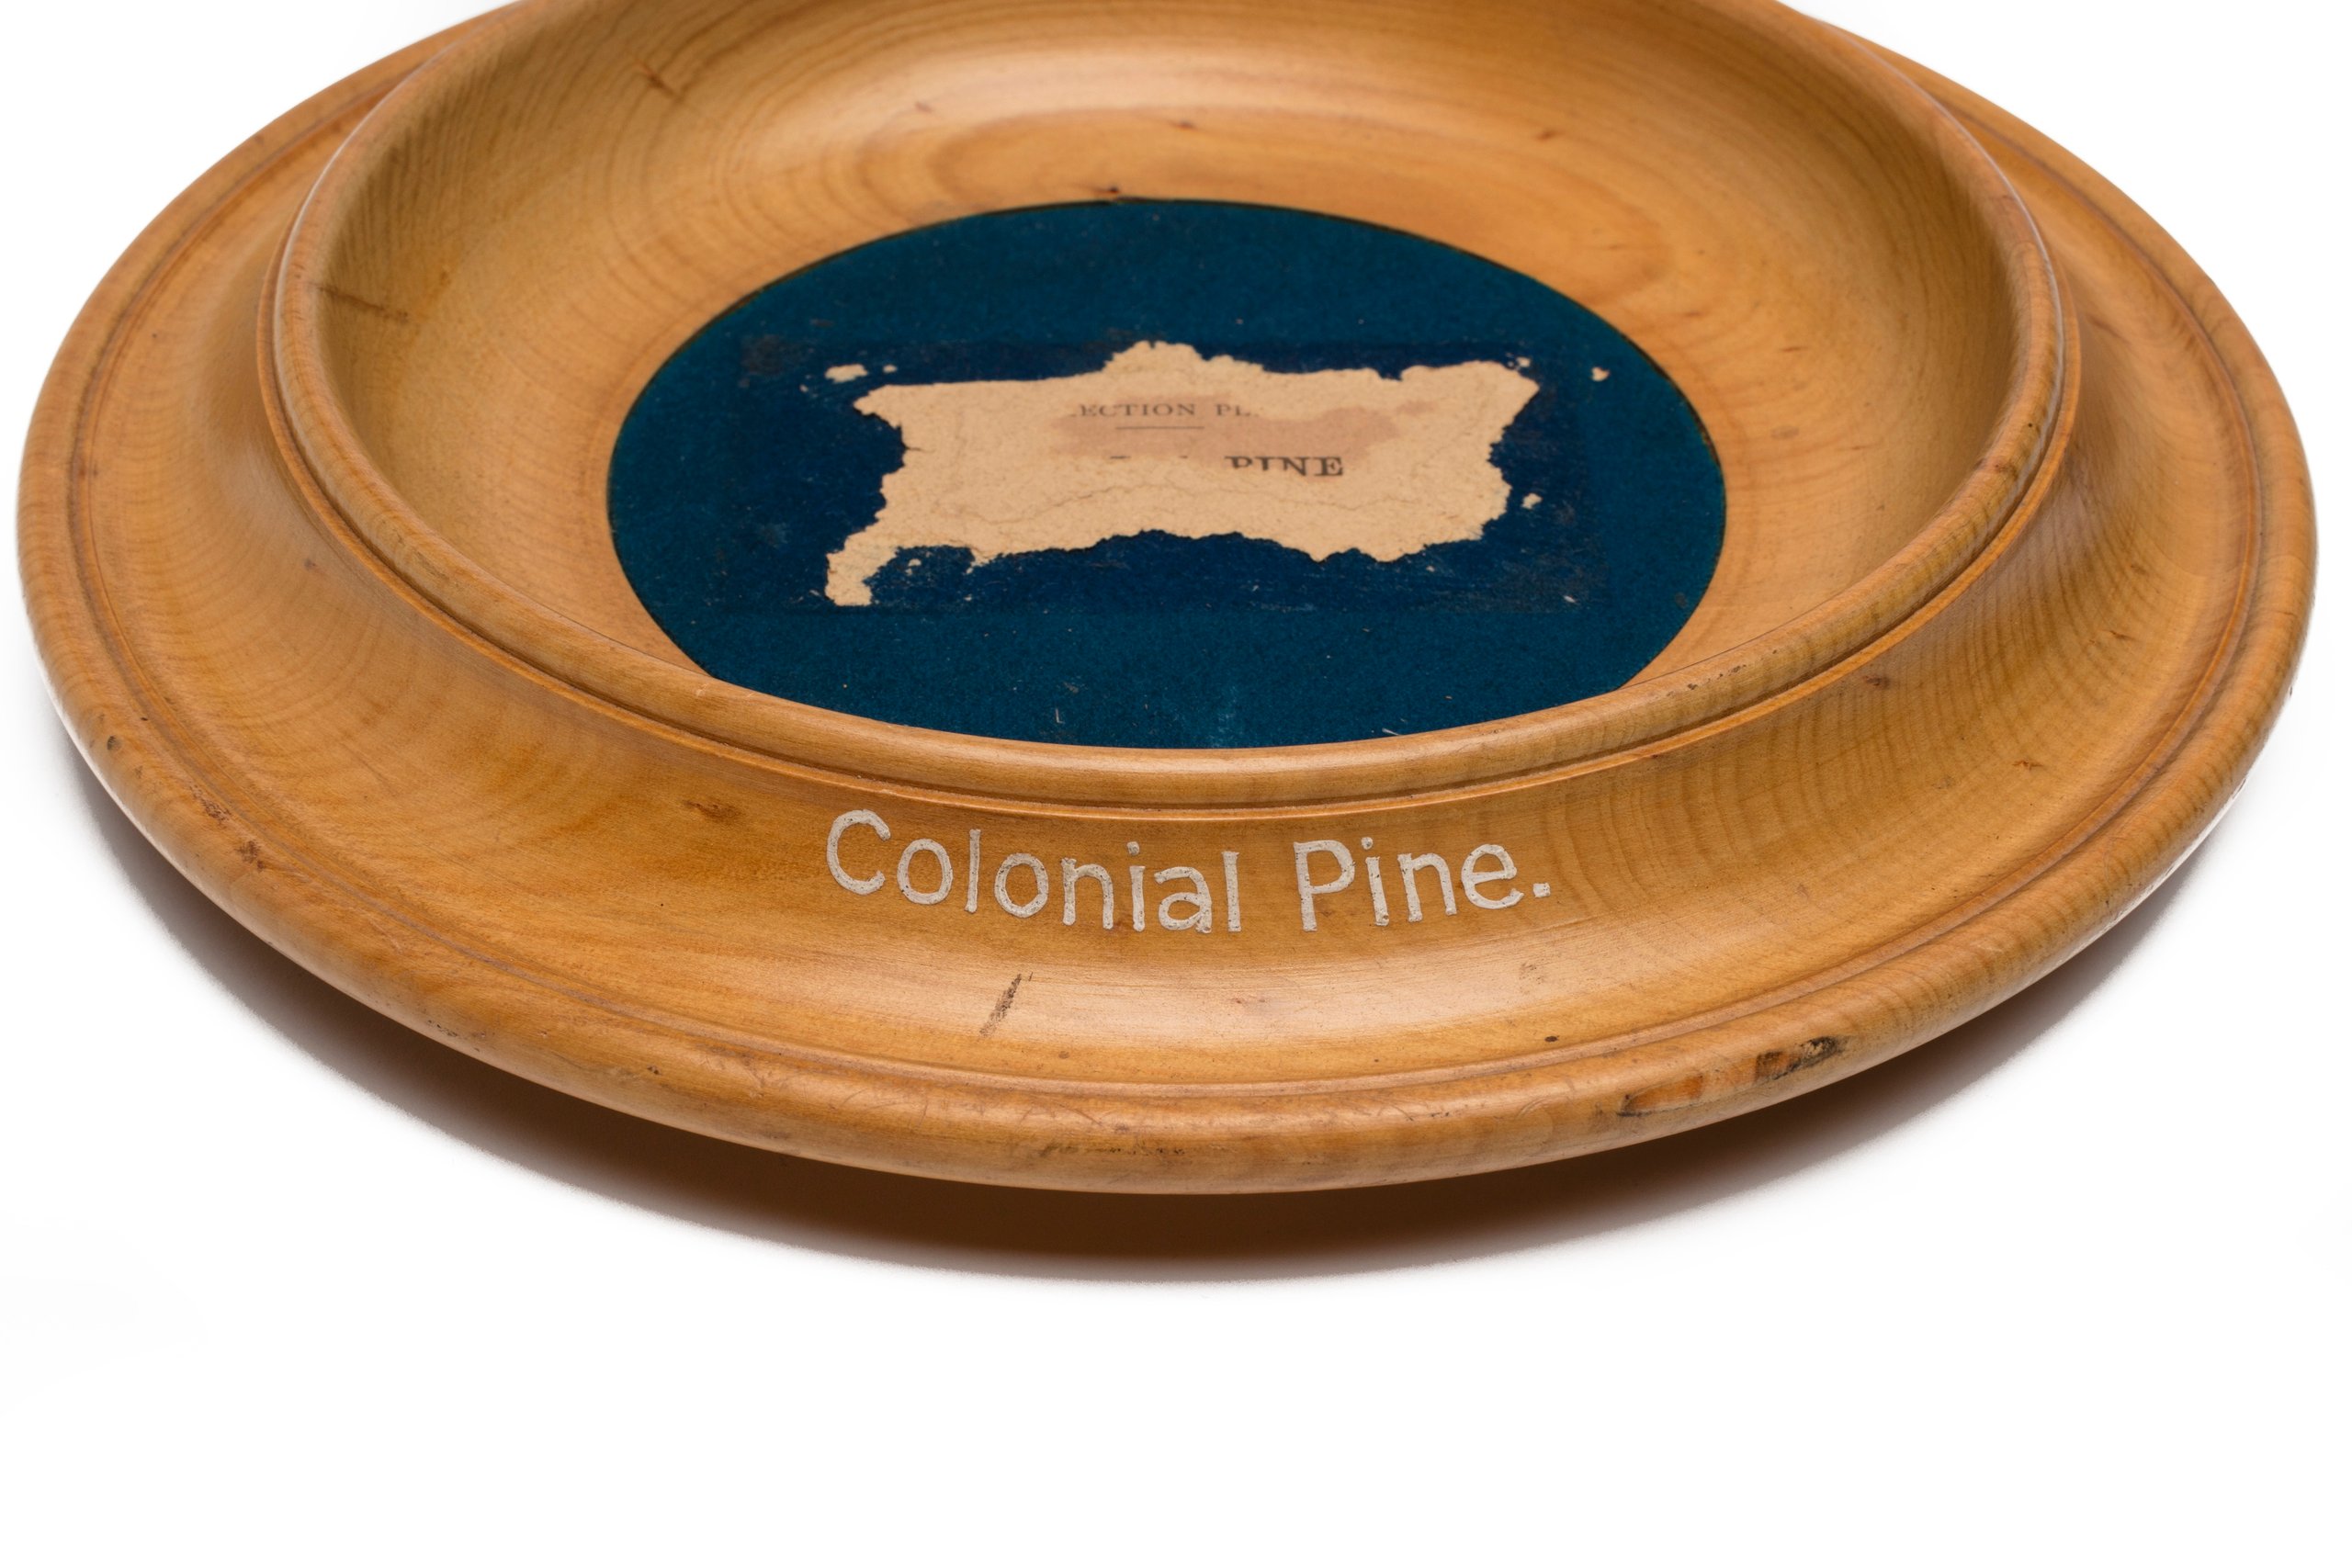 Timber specimen, collection plate made of Colonial Pine (Arancaria Cunninghamii)